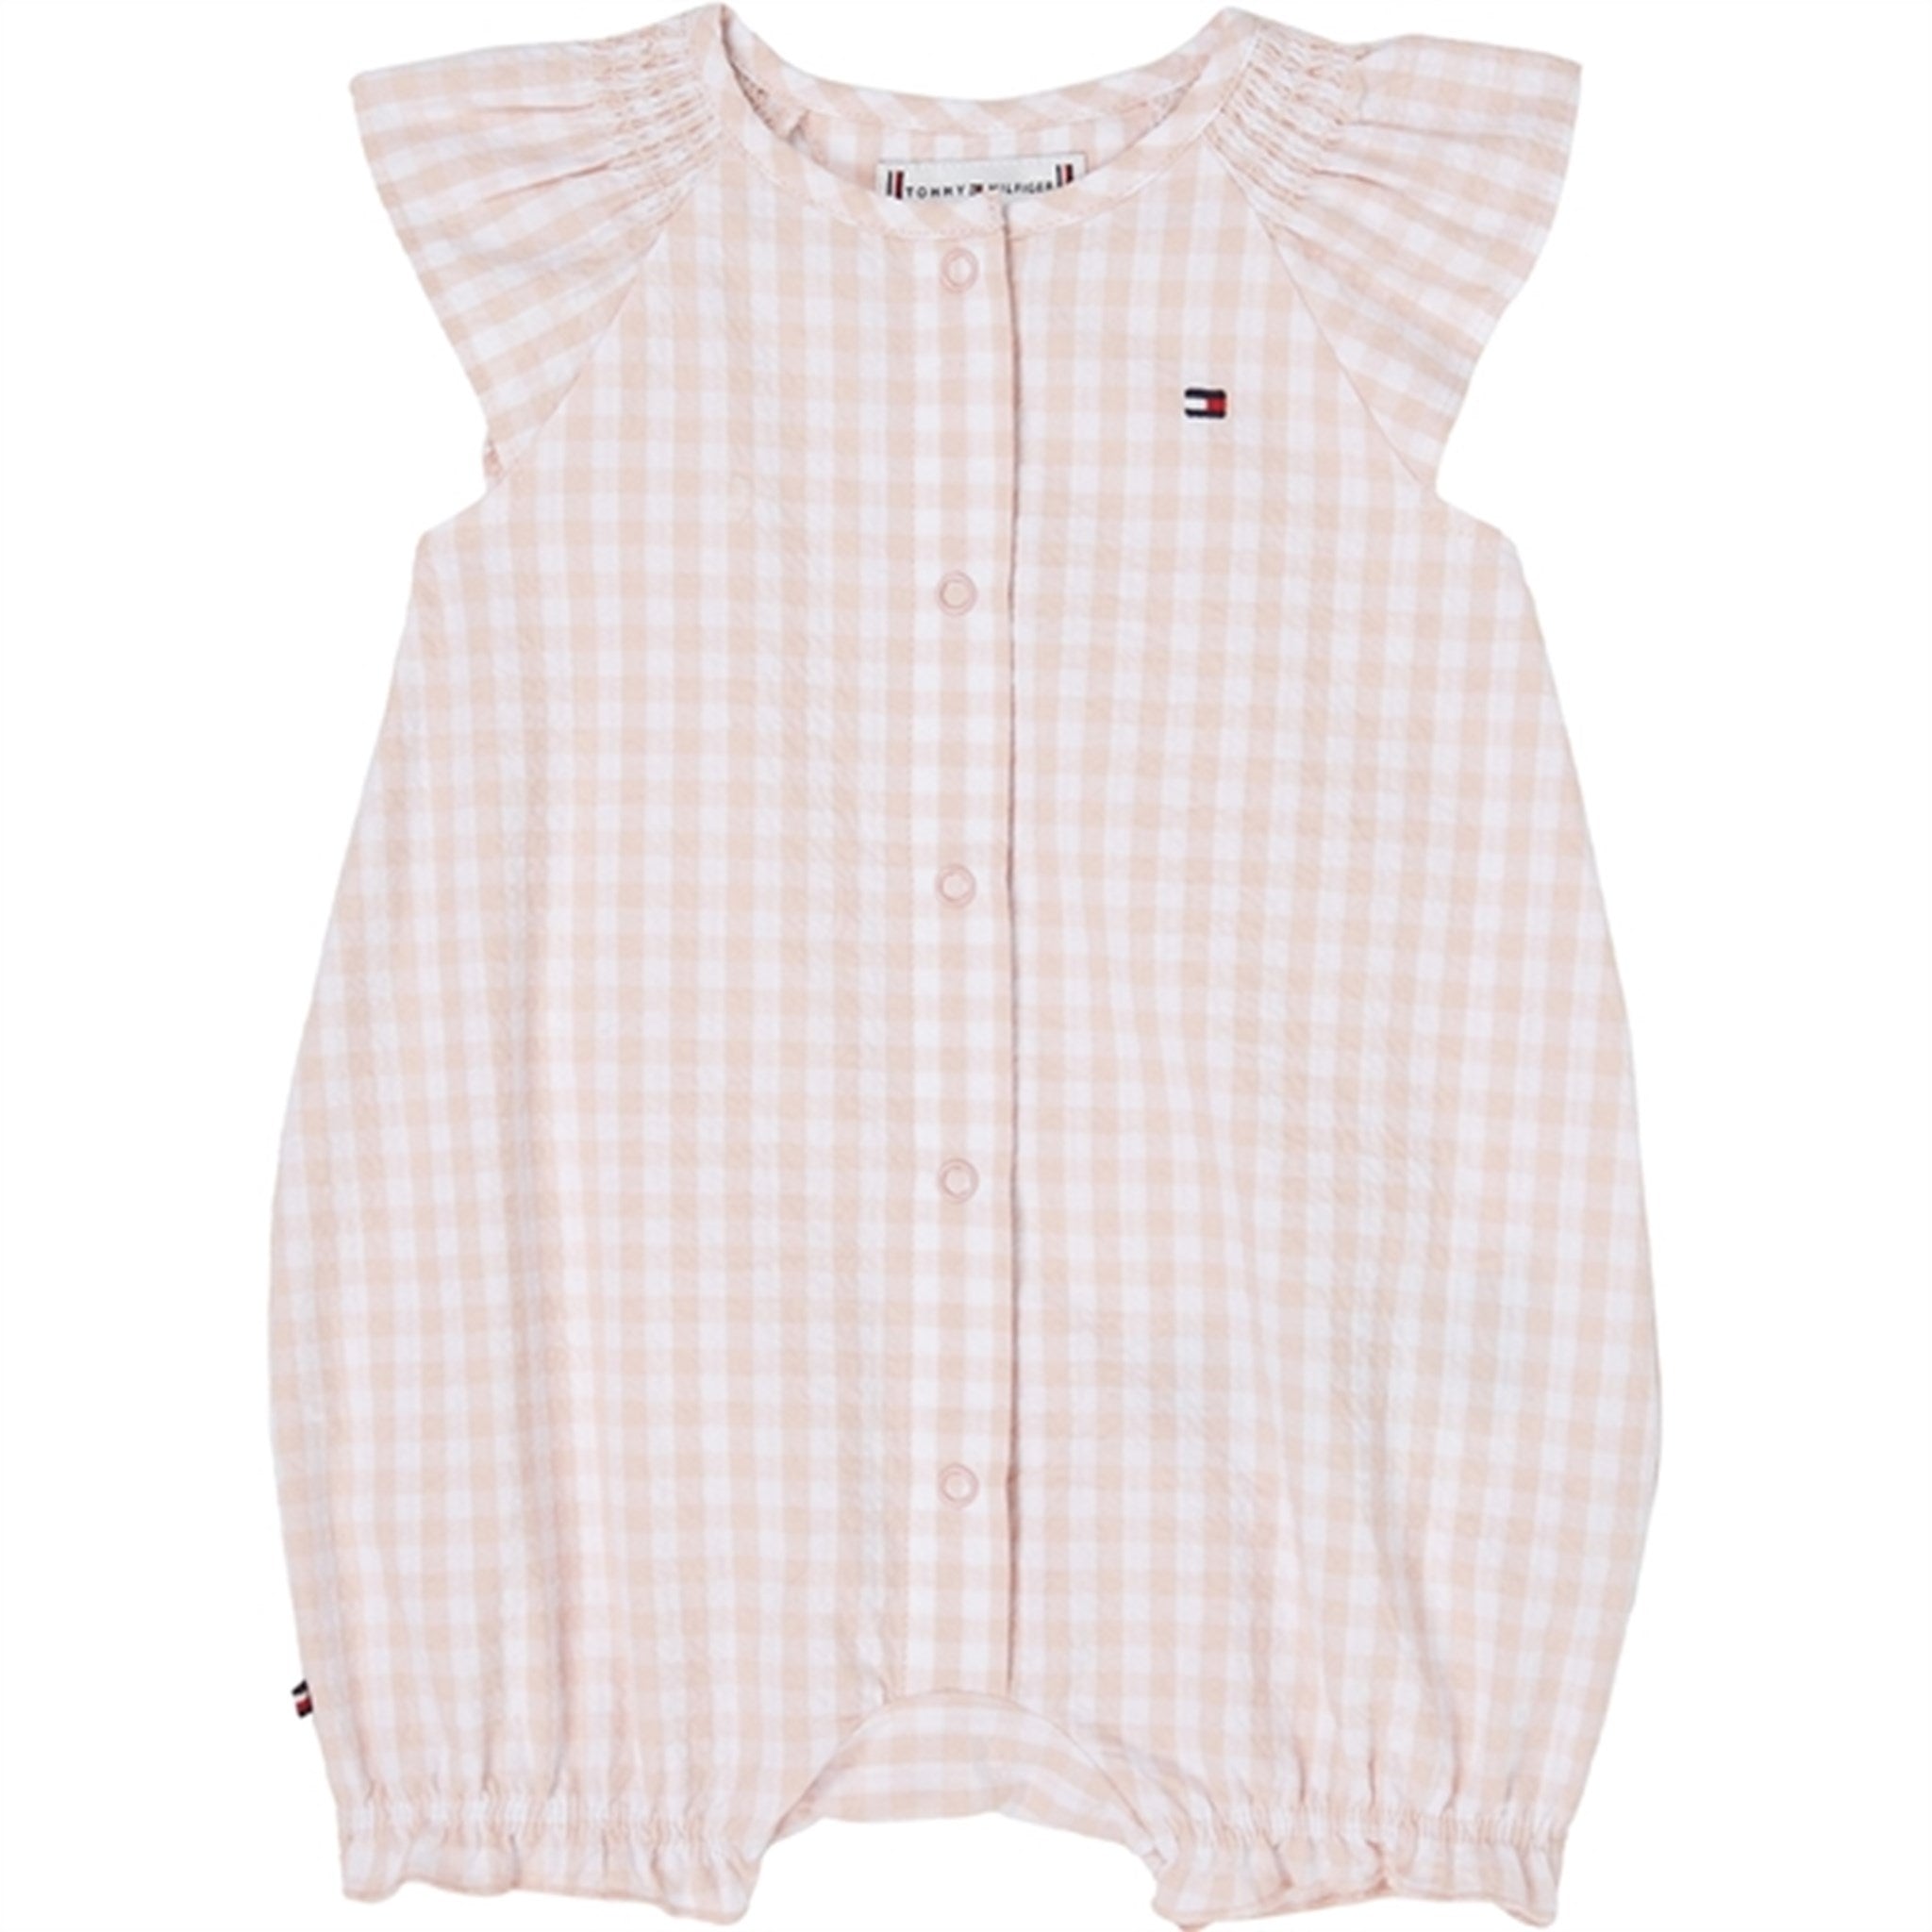 Tommy Hilfiger Baby Ruffle Gingham Rompers White / Pink Check